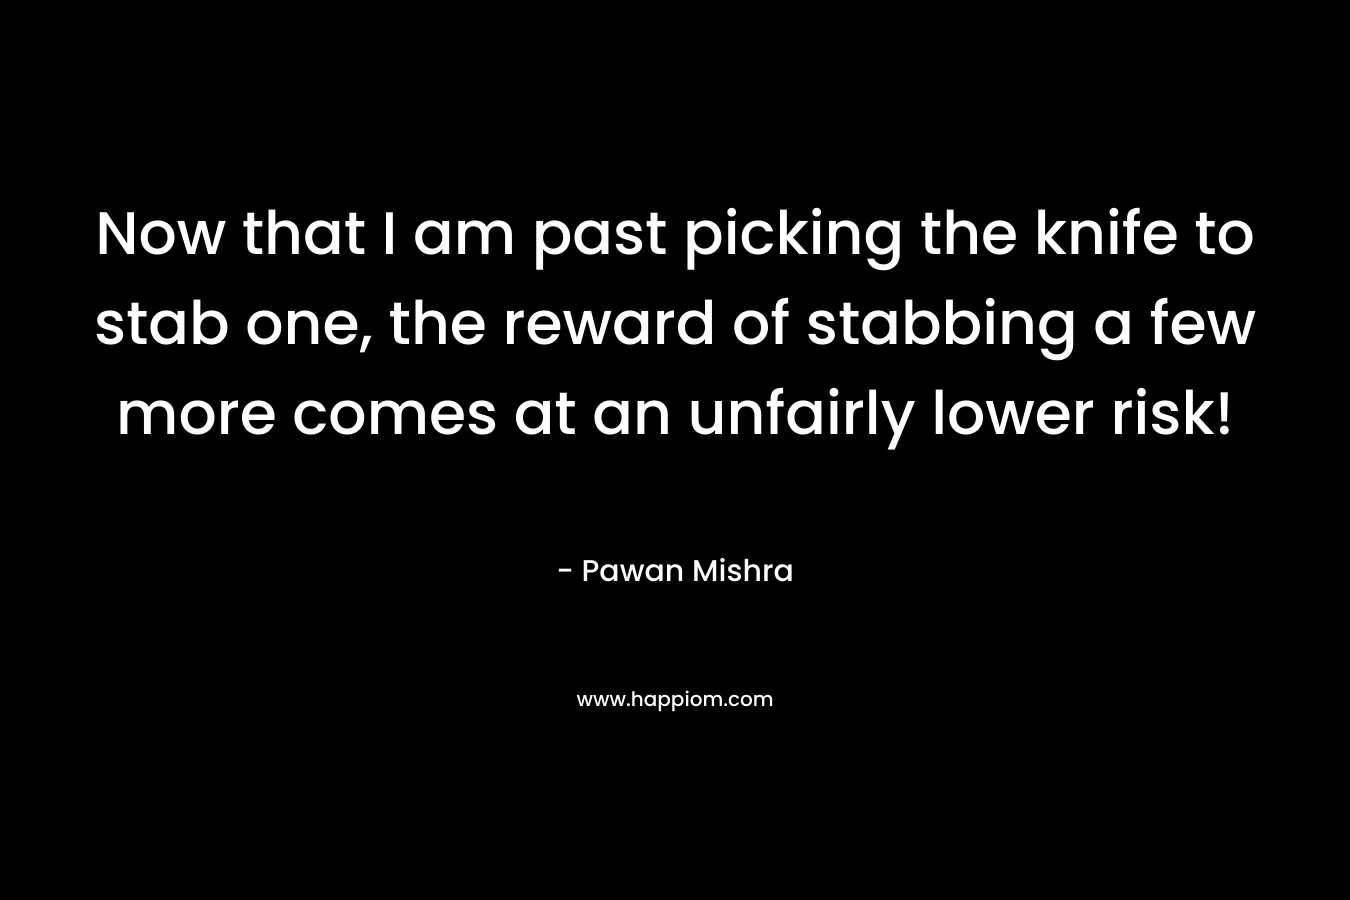 Now that I am past picking the knife to stab one, the reward of stabbing a few more comes at an unfairly lower risk! – Pawan Mishra